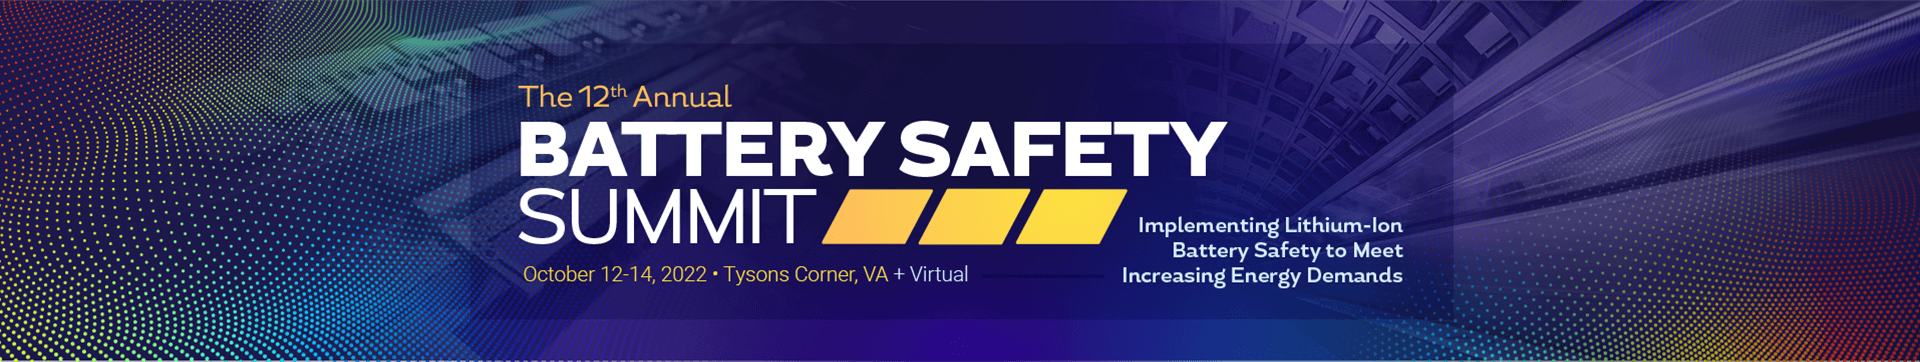 Battery Safety Summit Banner Image